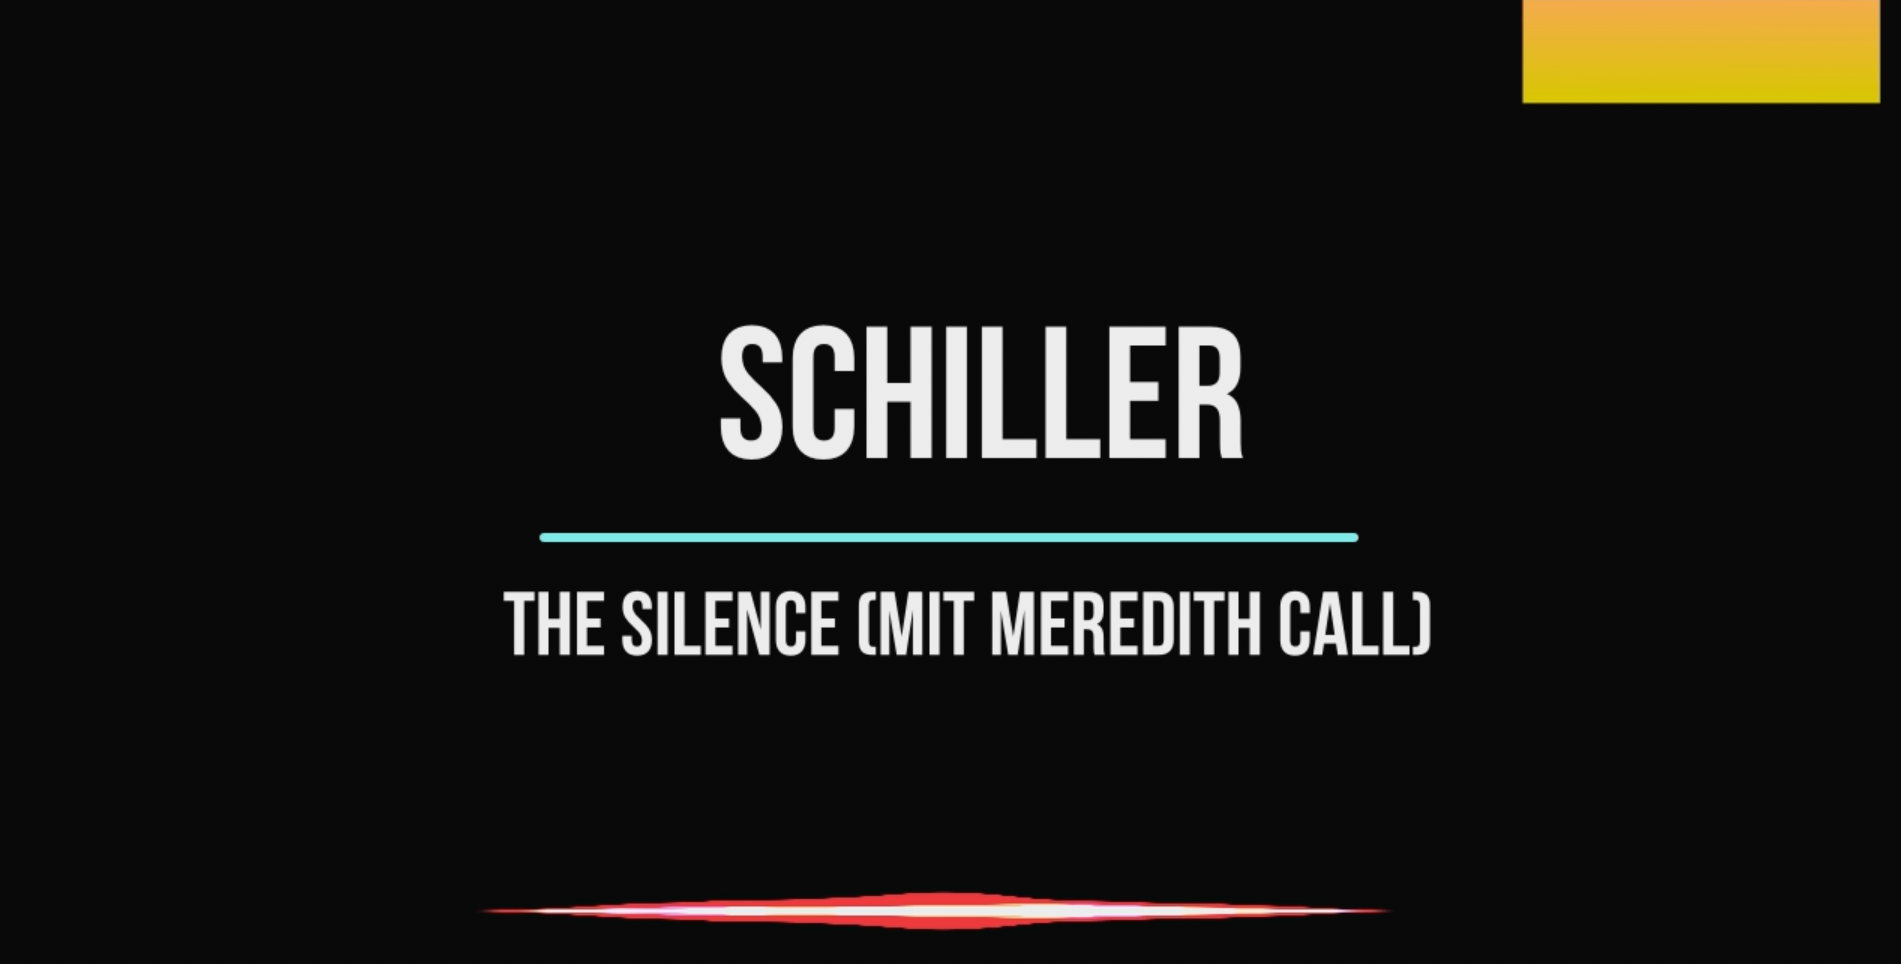 The Silence (mit Meredith Call)